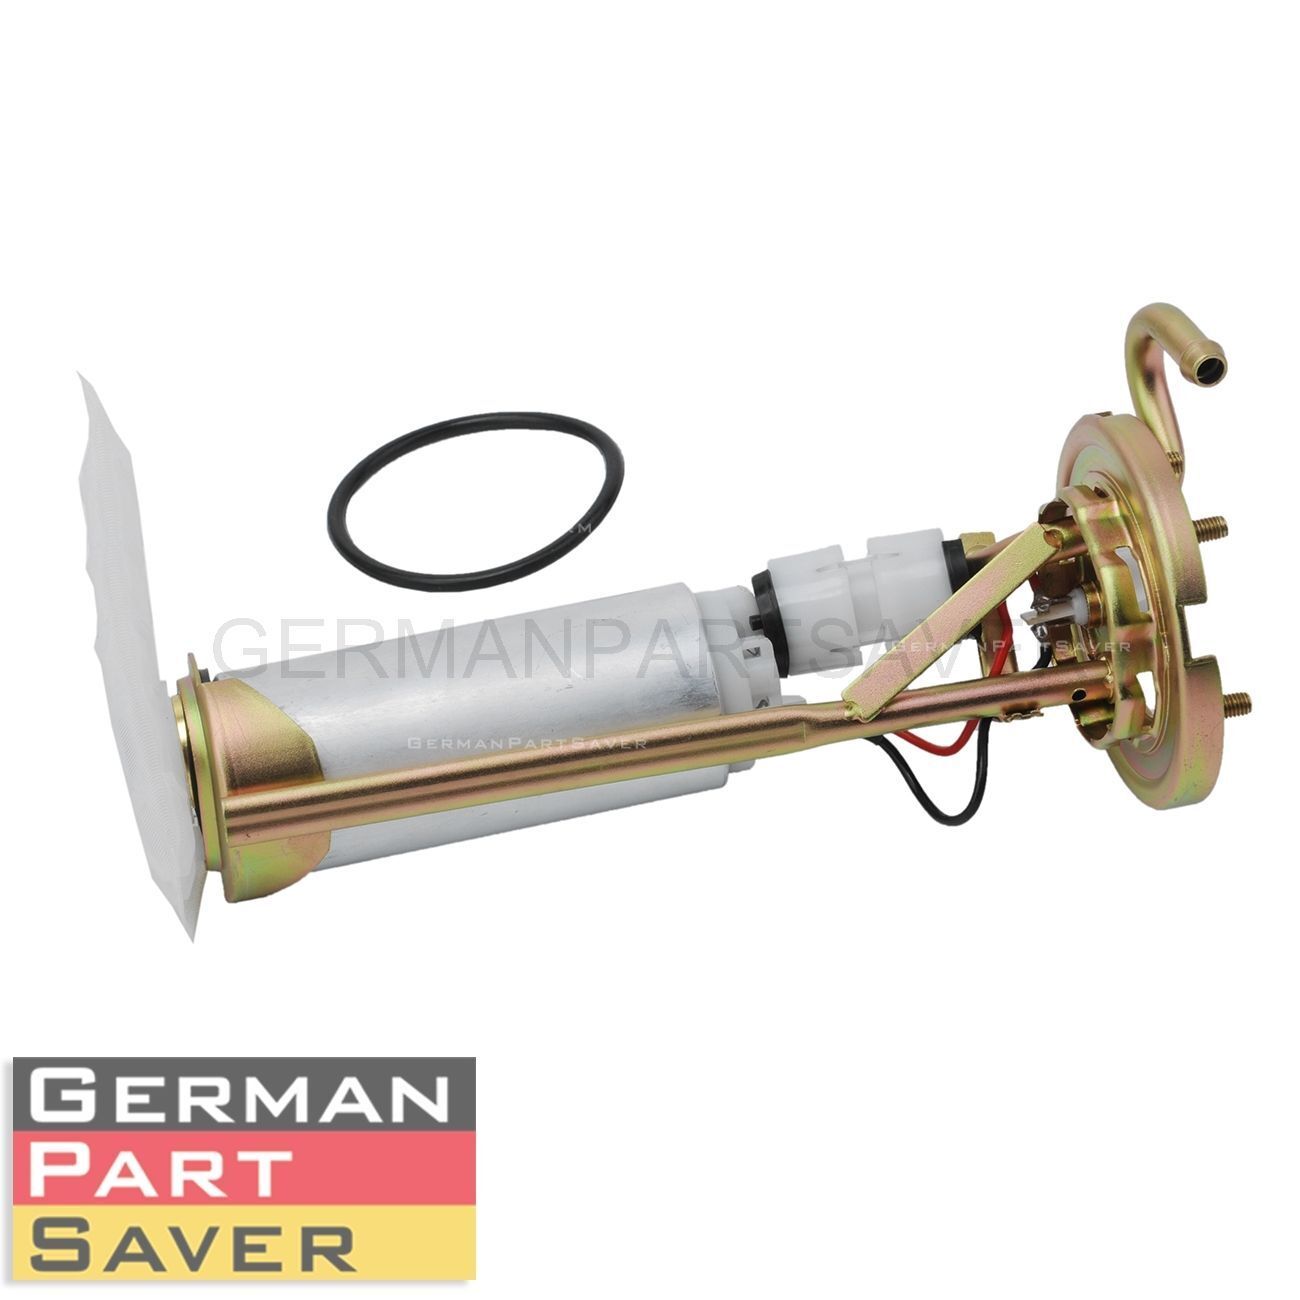 New Electric Fuel Pump Assembly for BMW 3 Series E30 325 325i 318i 325is 325ix